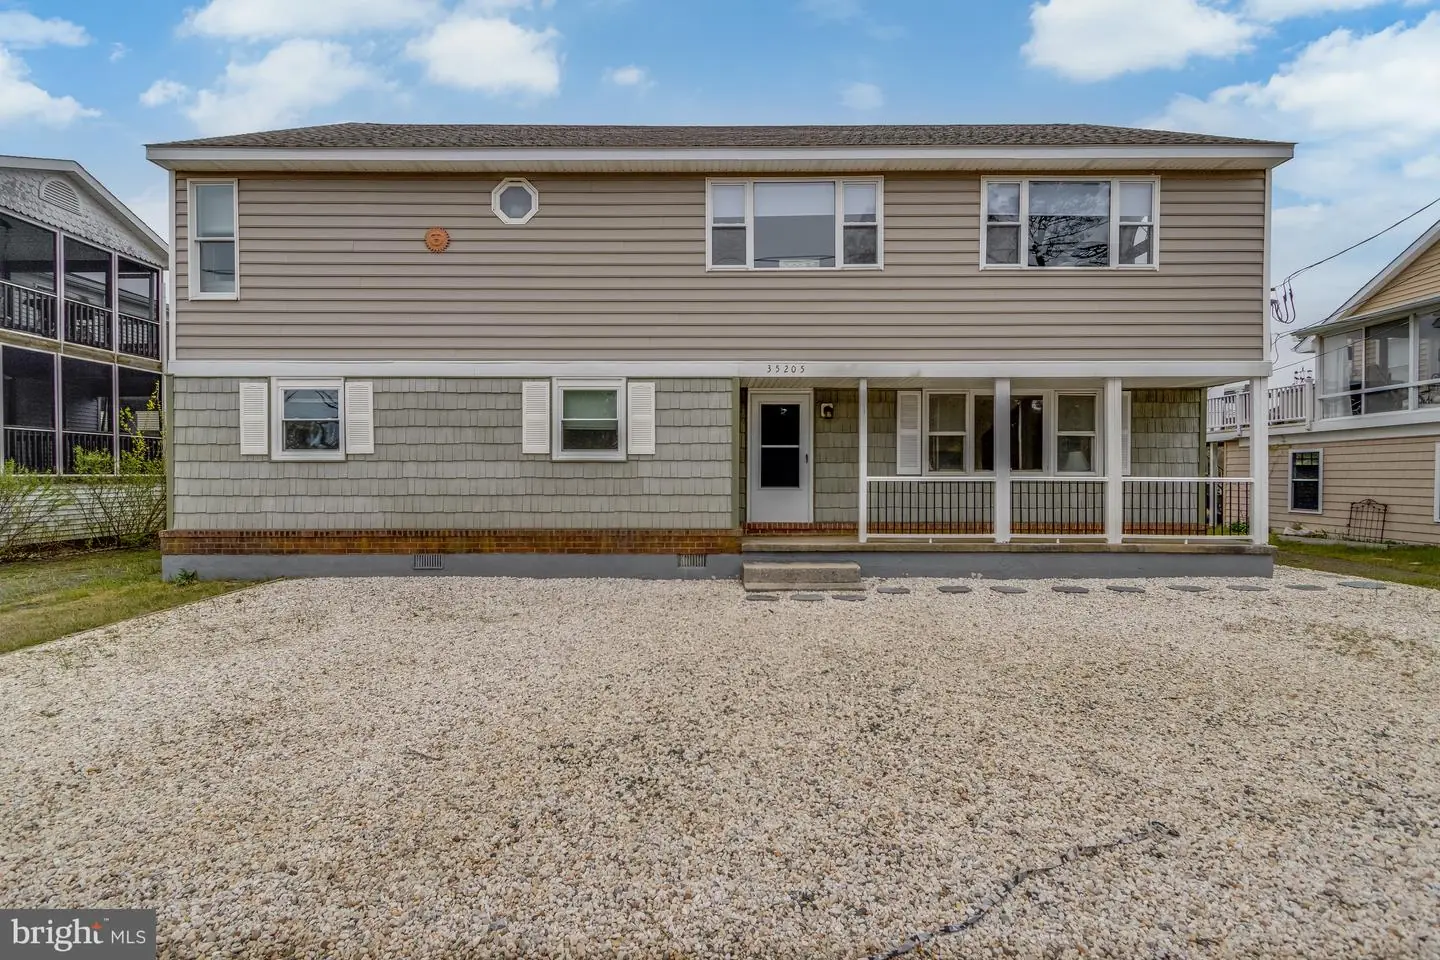 DESU2060190-803009595496-2024-04-21-00-08-06 35205 Hassell Ave | Bethany Beach, DE Real Estate For Sale | MLS# Desu2060190  - 1st Choice Properties